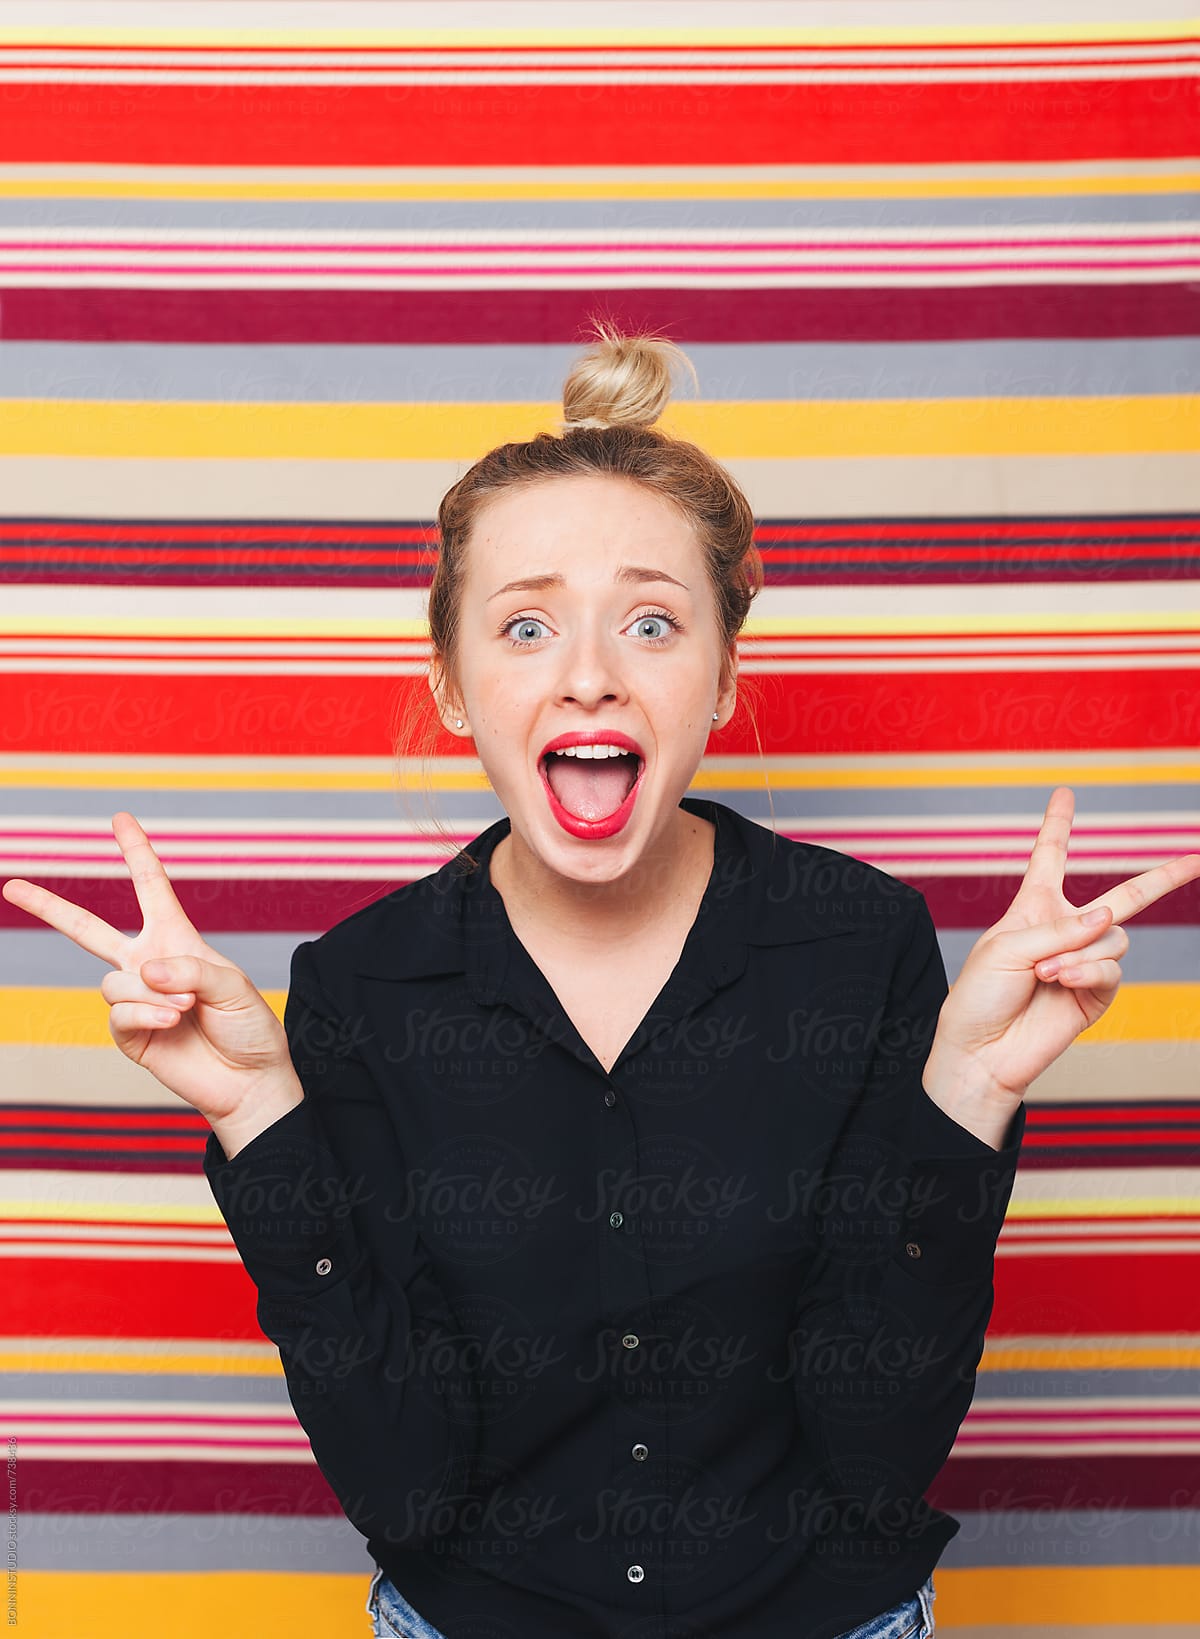 Portrait Of A Woman Making Funny Faces In Front Of A Striped Wall By Stocksy Contributor